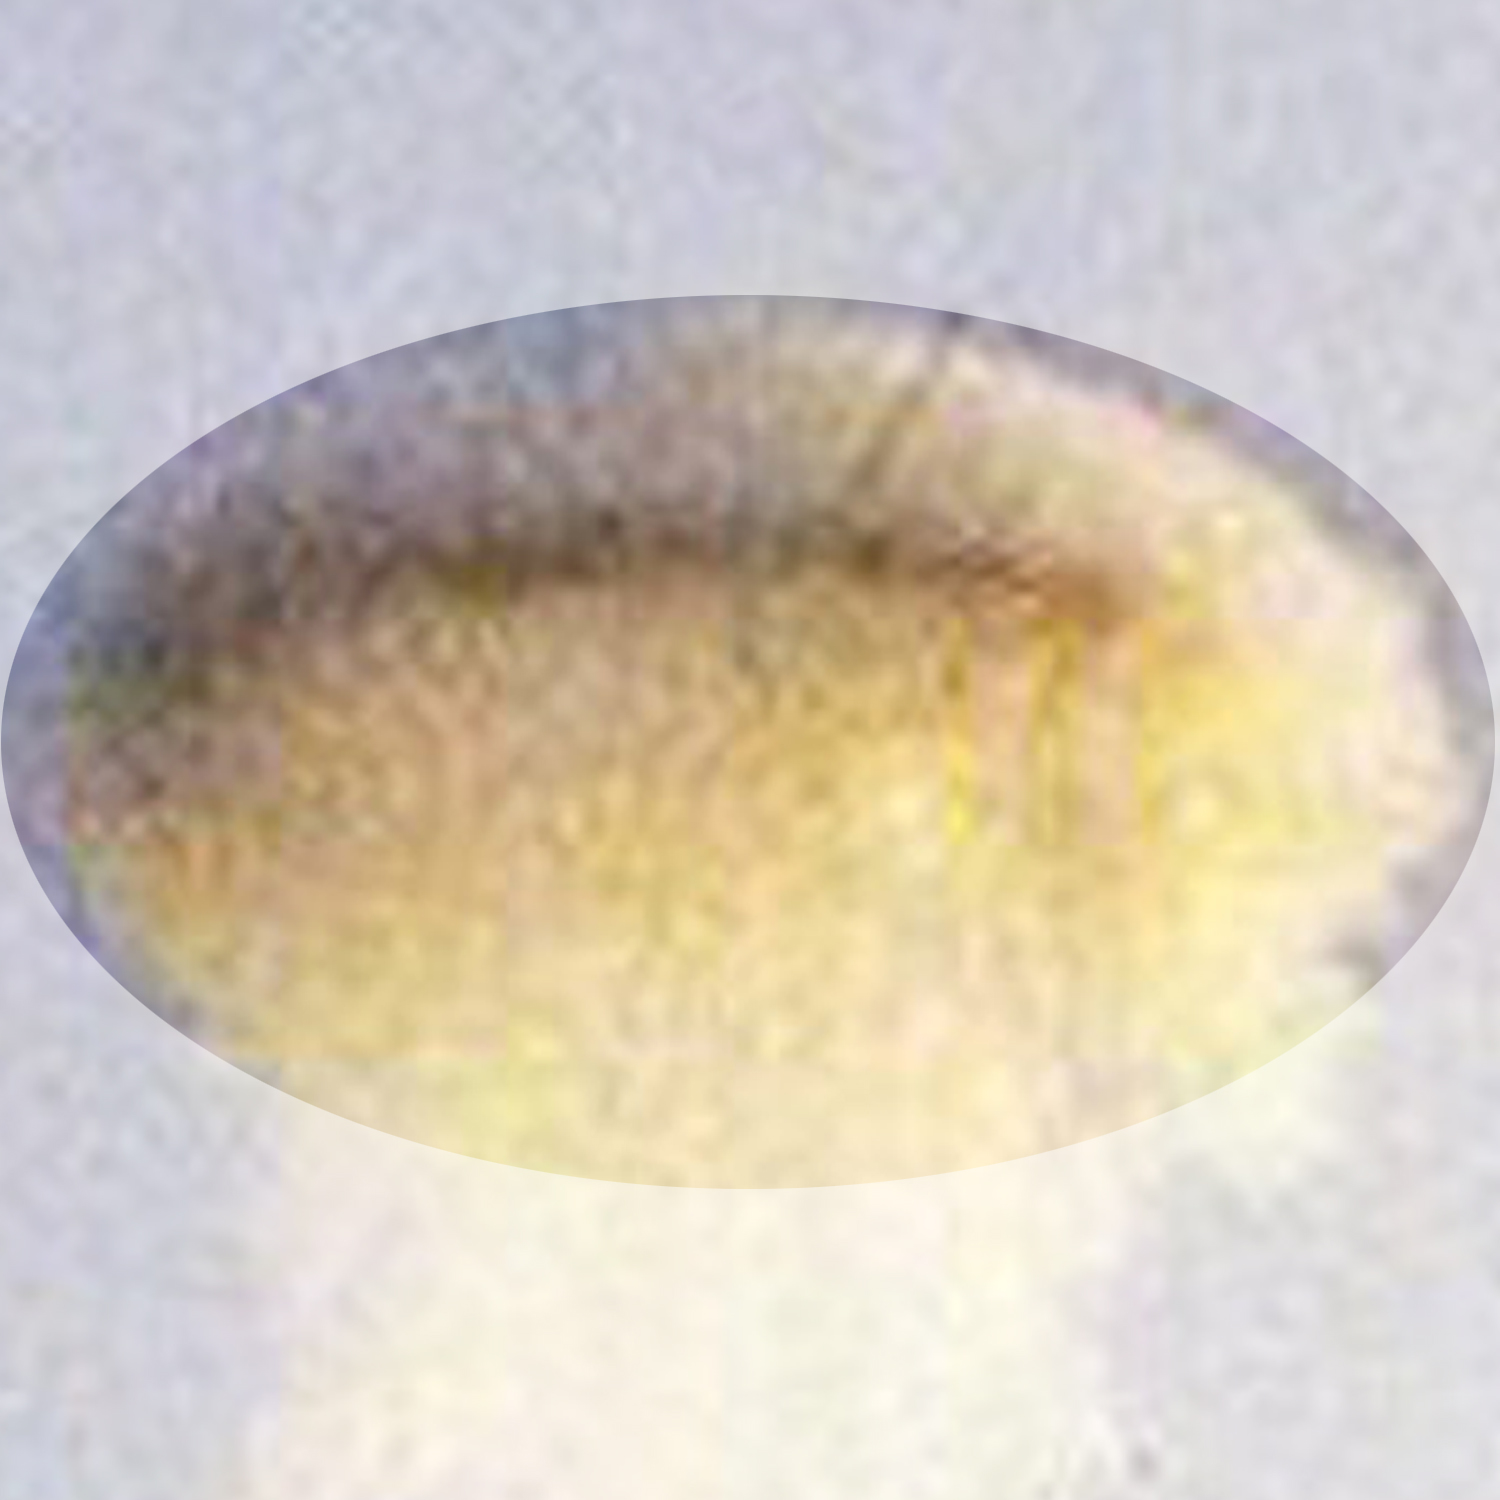 Best UFO picture showing UFO in Cloud disguise | Viborg, Denmark 1974 UFO Picture #222-6